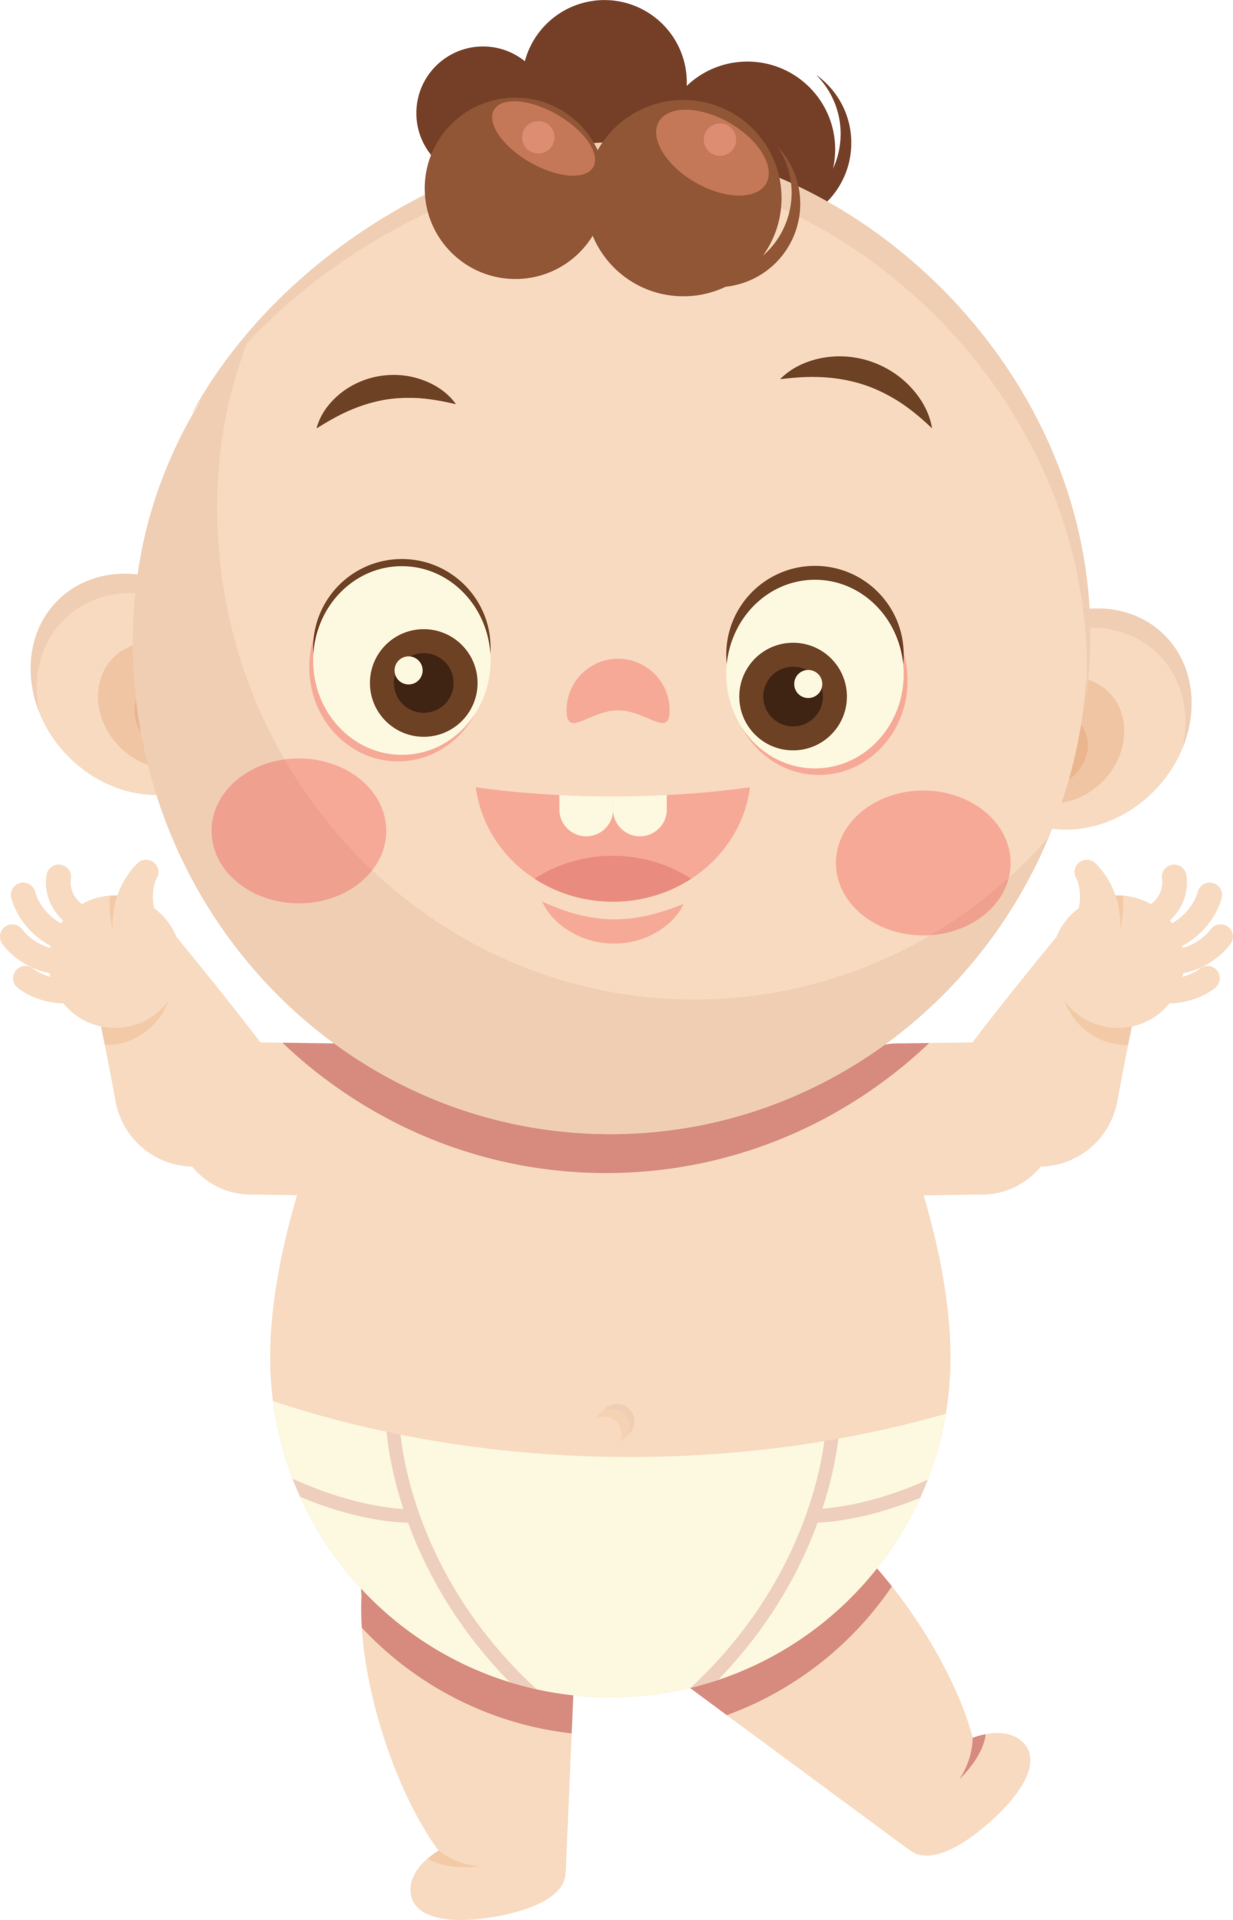 Free baby cartoon illustration 15099682 PNG with Transparent Background